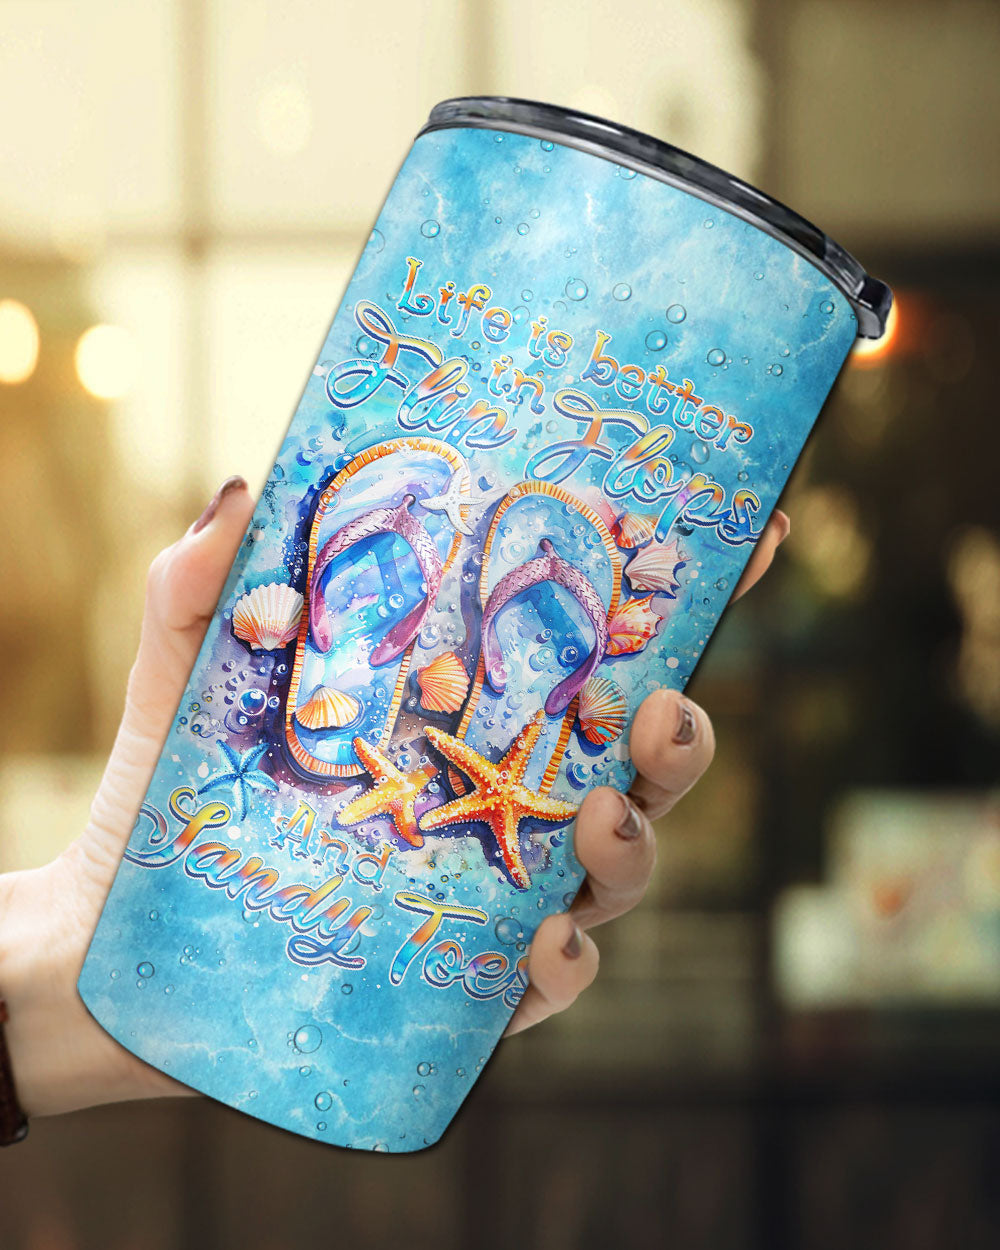 LIFE IS BETTER IN FLIP-FLOPS AND SANDY TOES TUMBLER - YHHN1004247